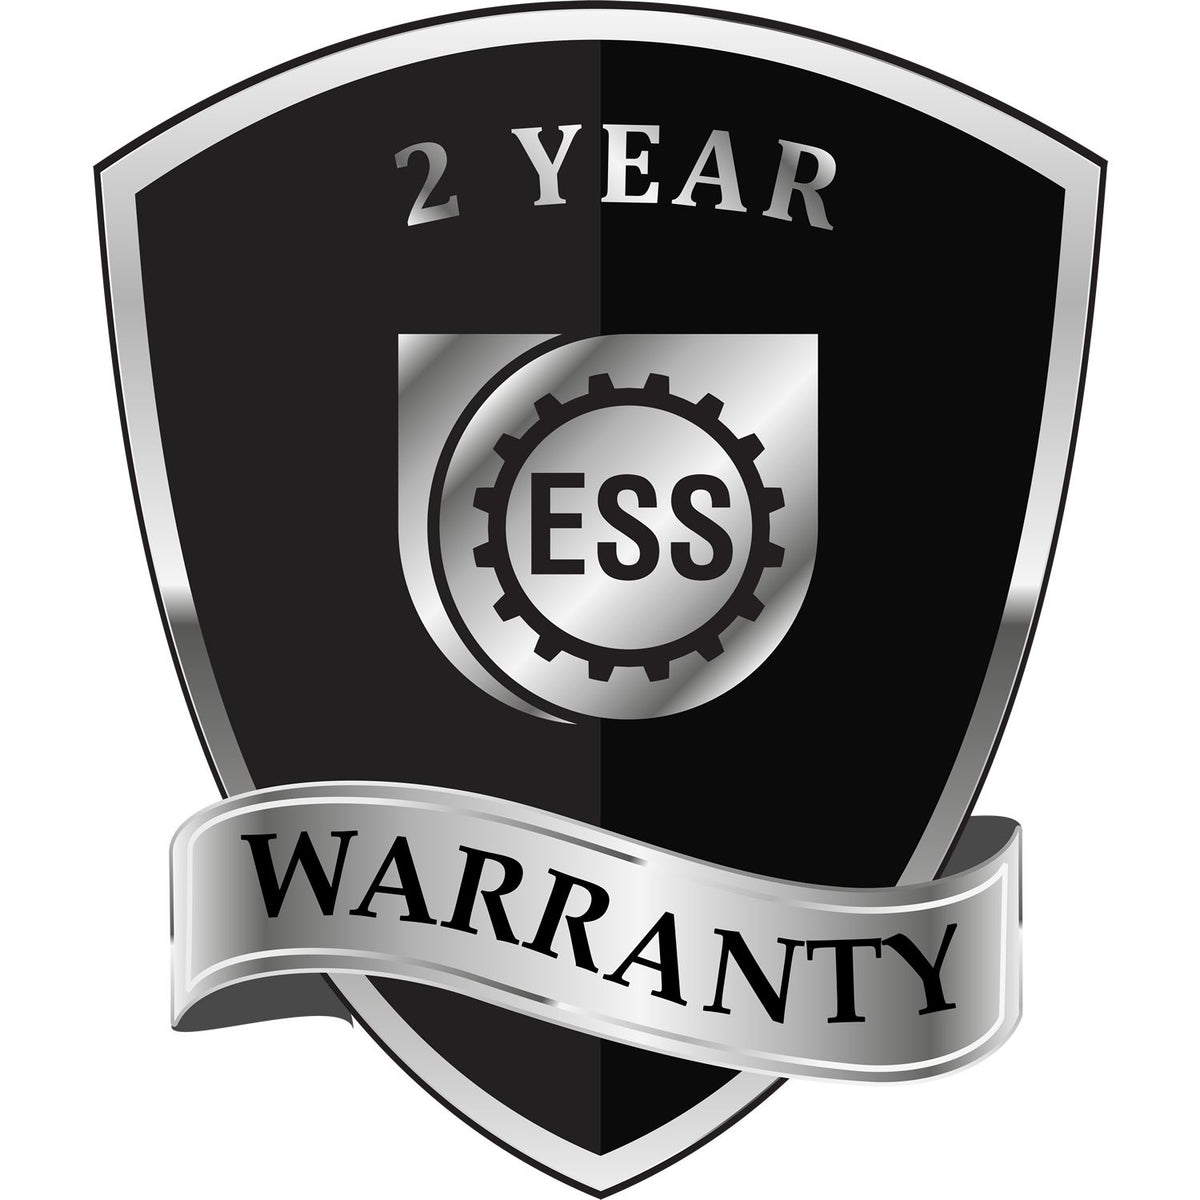 A black and silver badge or emblem showing warranty information for the Gift Virginia Architect Seal